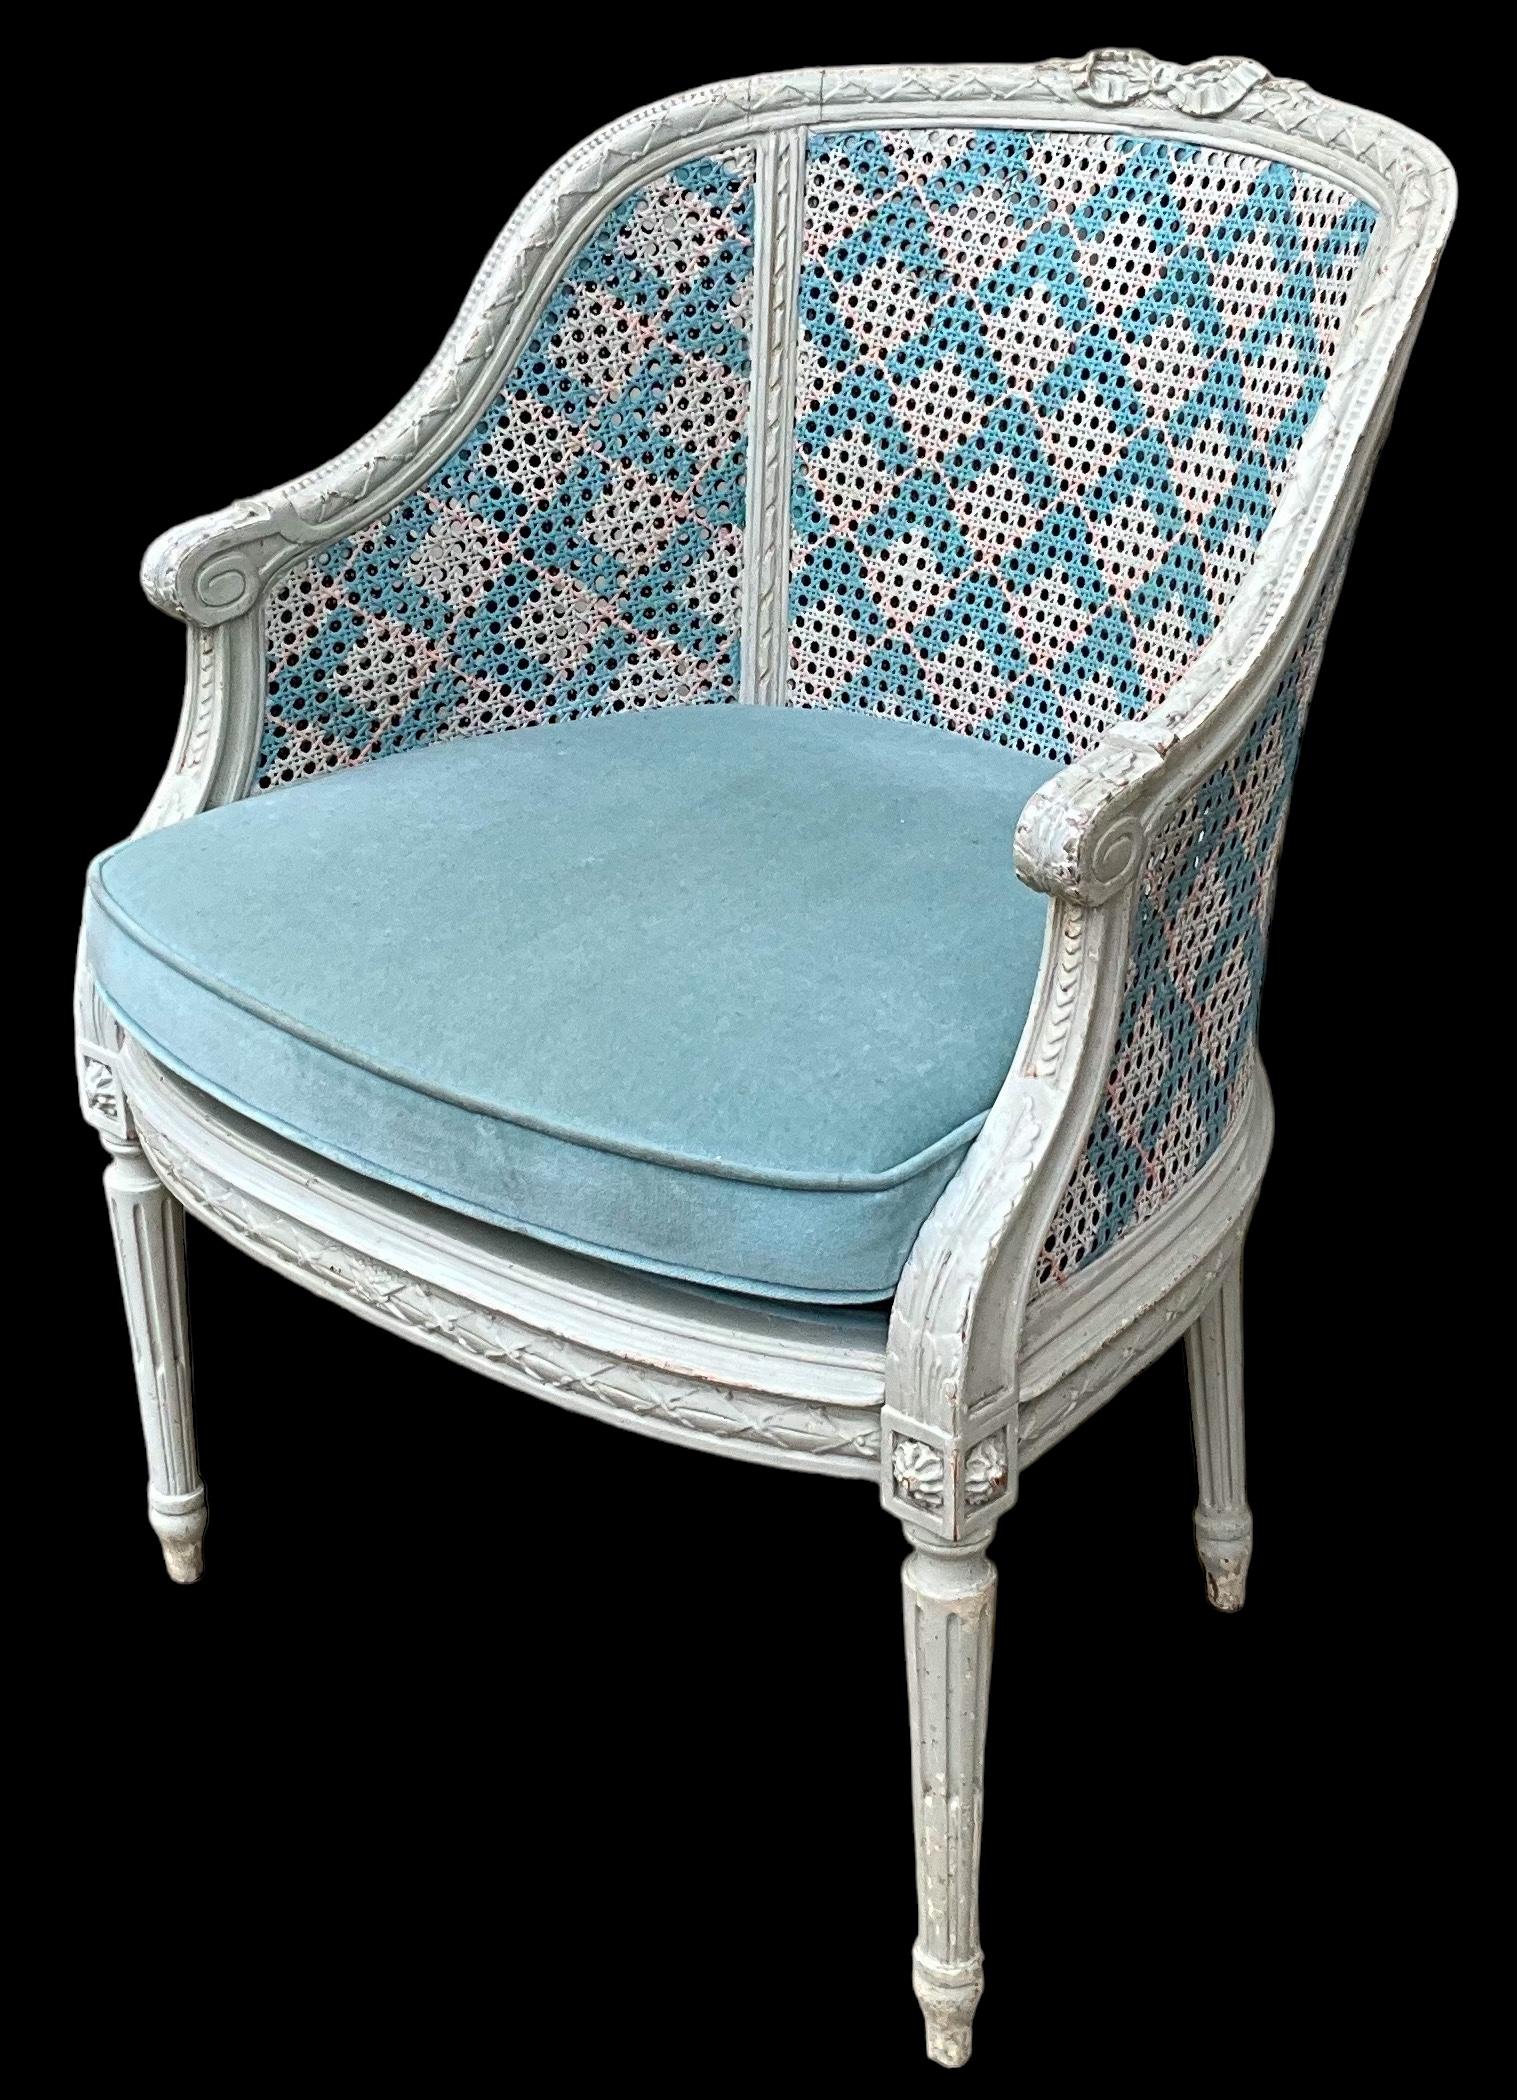 This is a lovely French hand painted carved fruitwood chair that has been hand painted in a lovely blue, white and pink diamond. The cushion is vintage and shows lite wear. It is unmarked and most likely dates to the 40s or 50s.